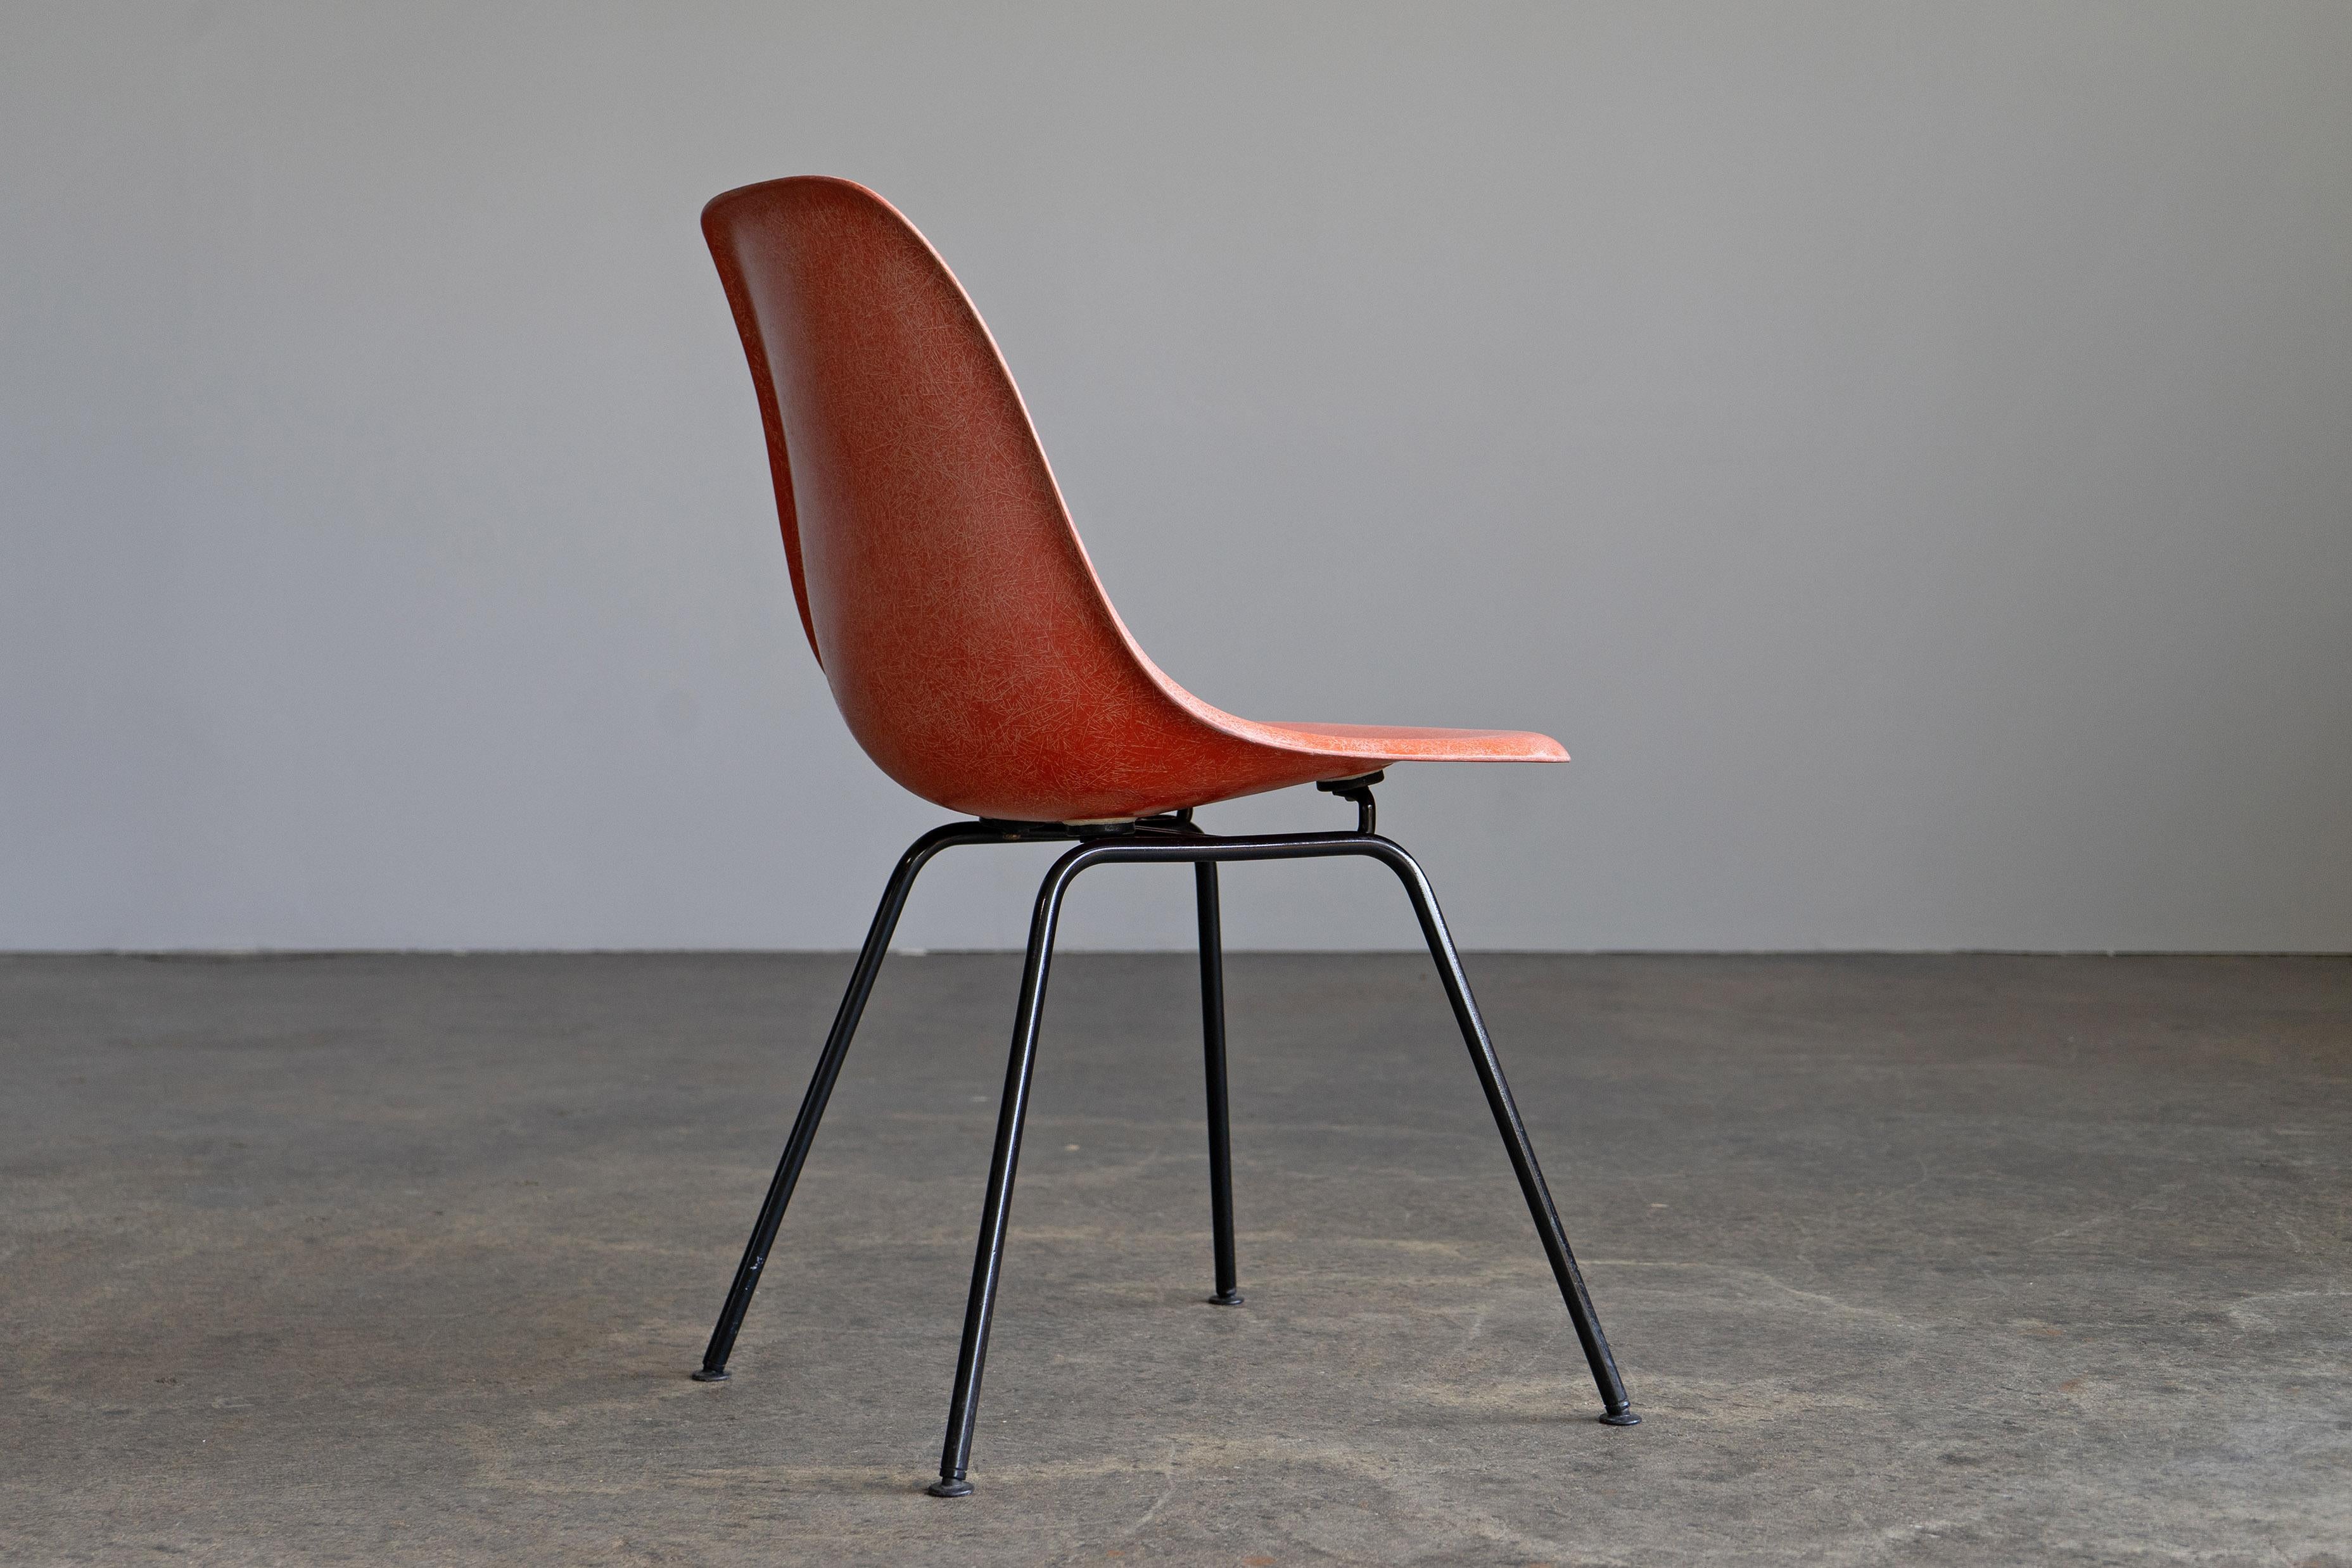 Steel Set of 4 Ray & Charles Eames Fiberglass Side Chairs Herman Miller / Vitra, 1960s For Sale